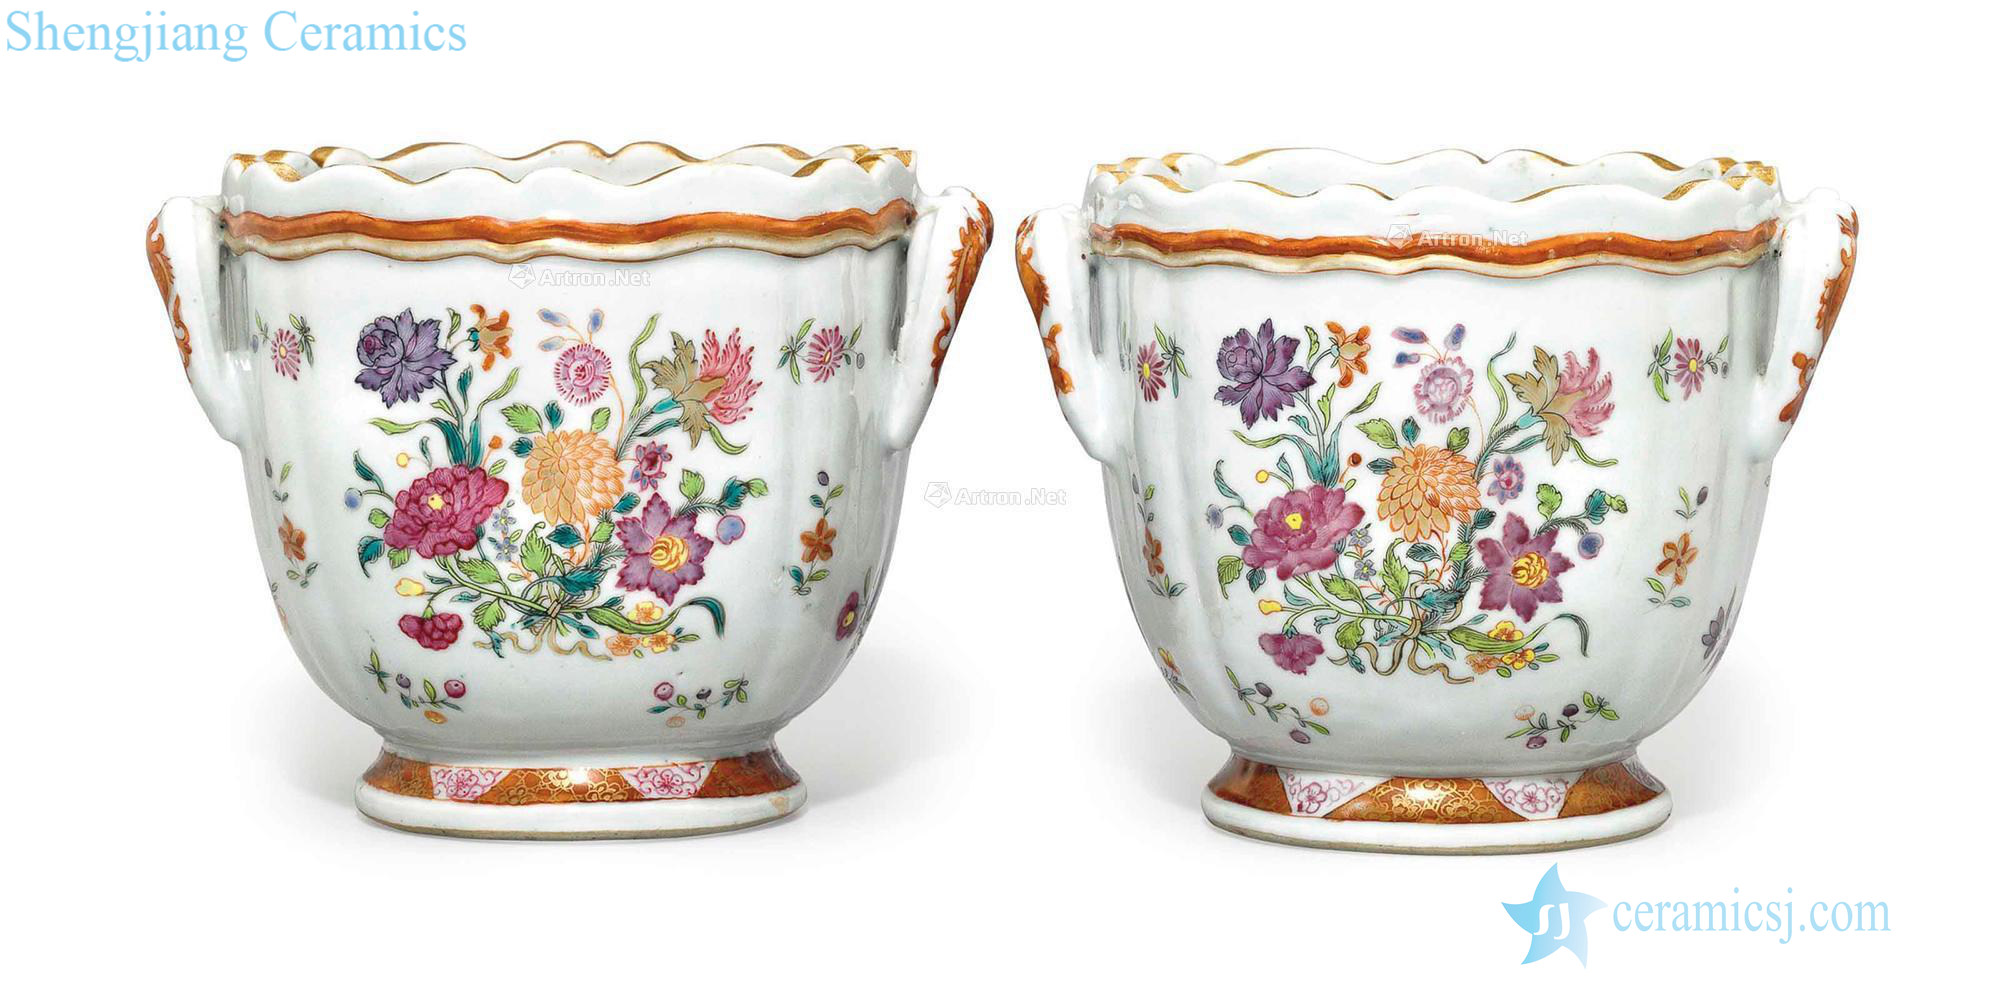 Qianlong period, about 1770 A PAIR OF FAMILLE ROSE WINE COOLERS